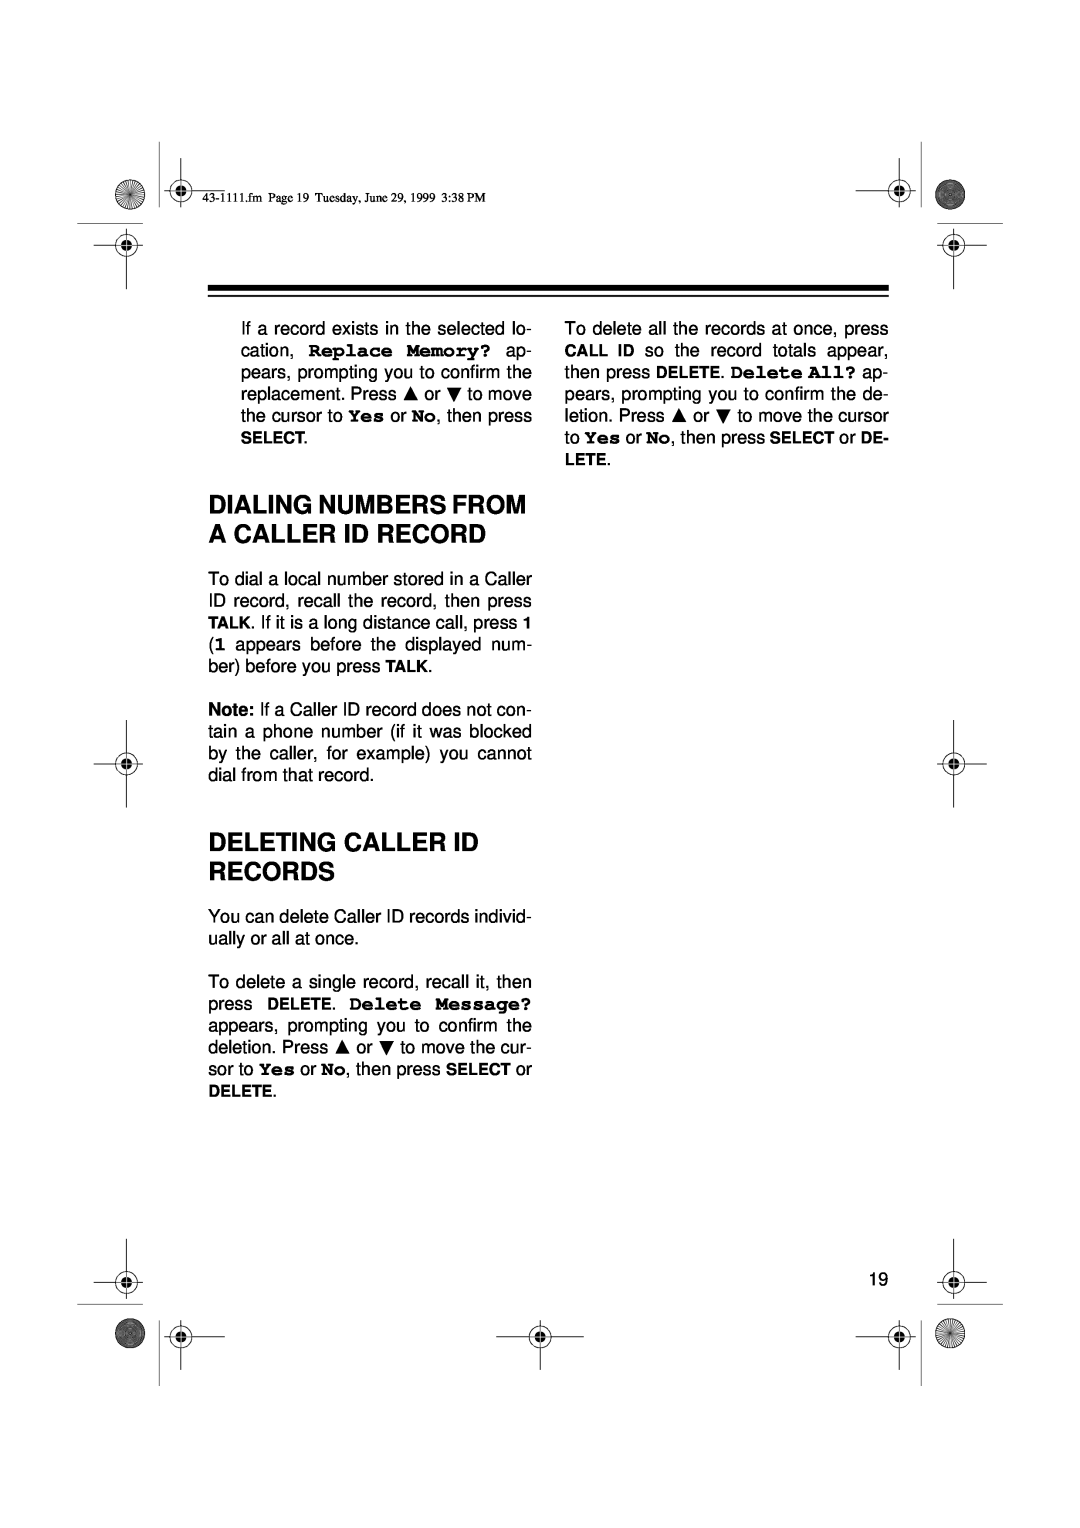 Radio Shack ET-1111 owner manual Dialing Numbers From A Caller Id Record, Deleting Caller Id Records 